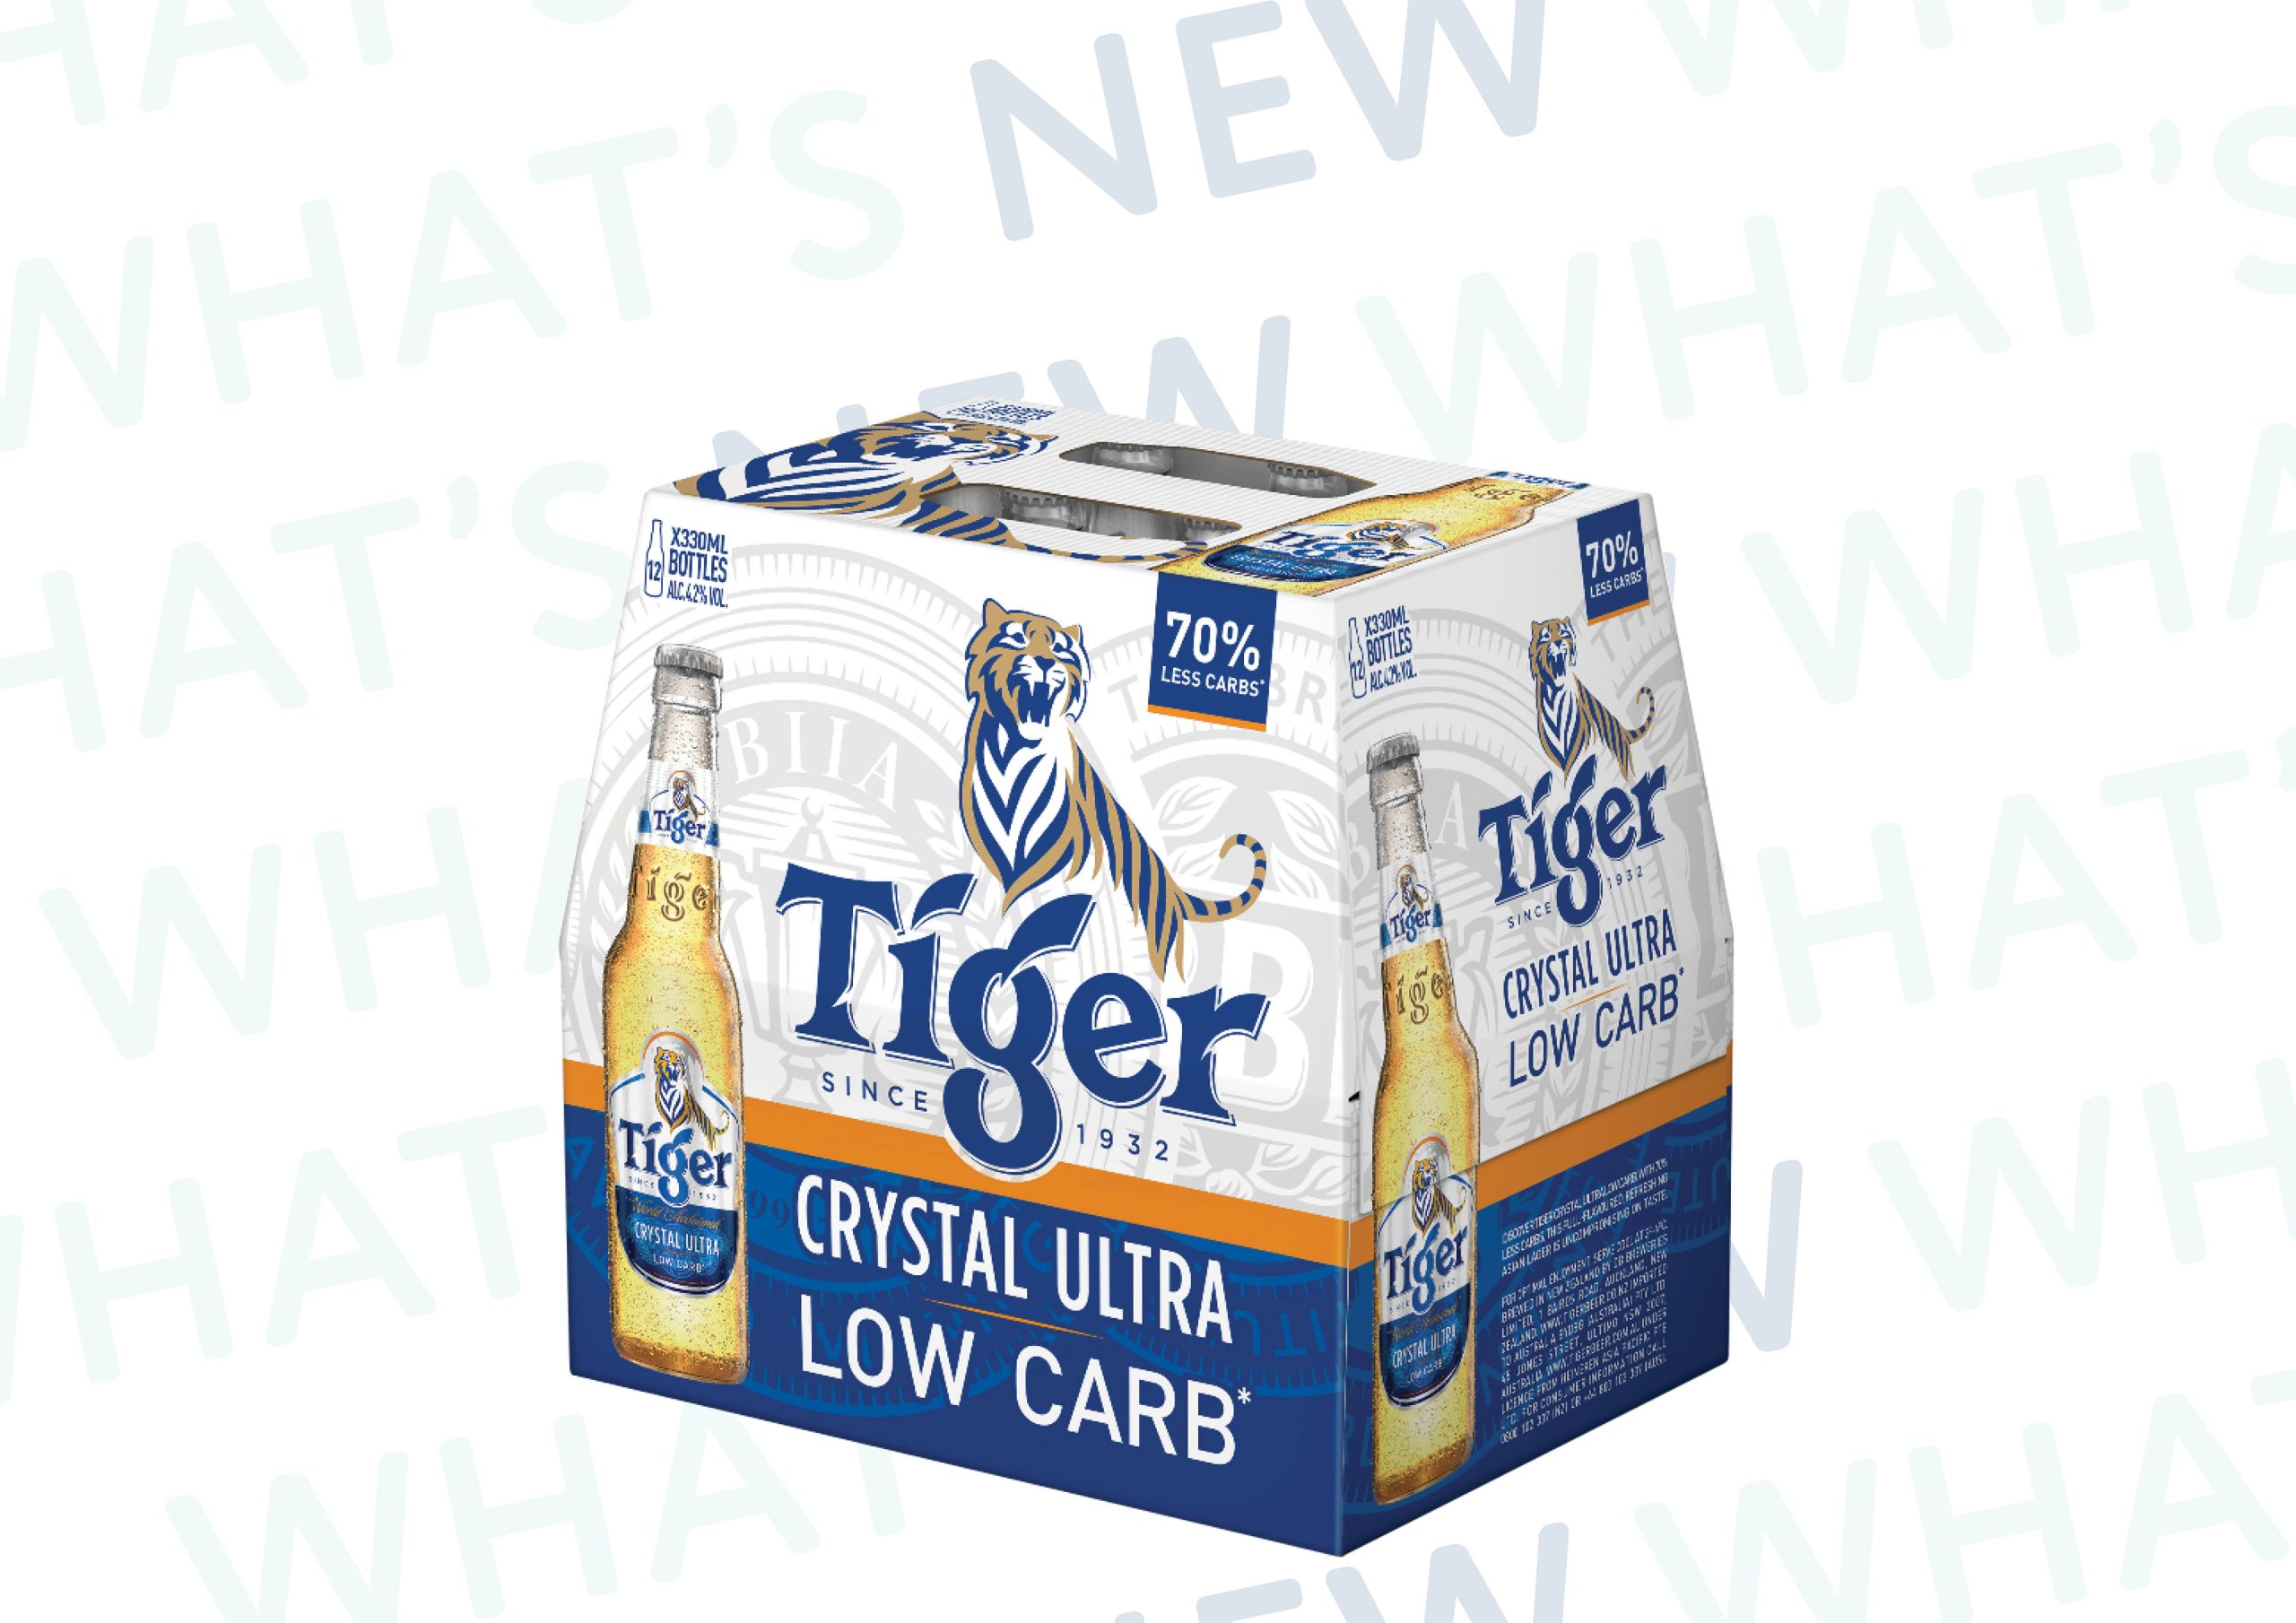 New Tiger Crystal Ultra Low Carb Beer